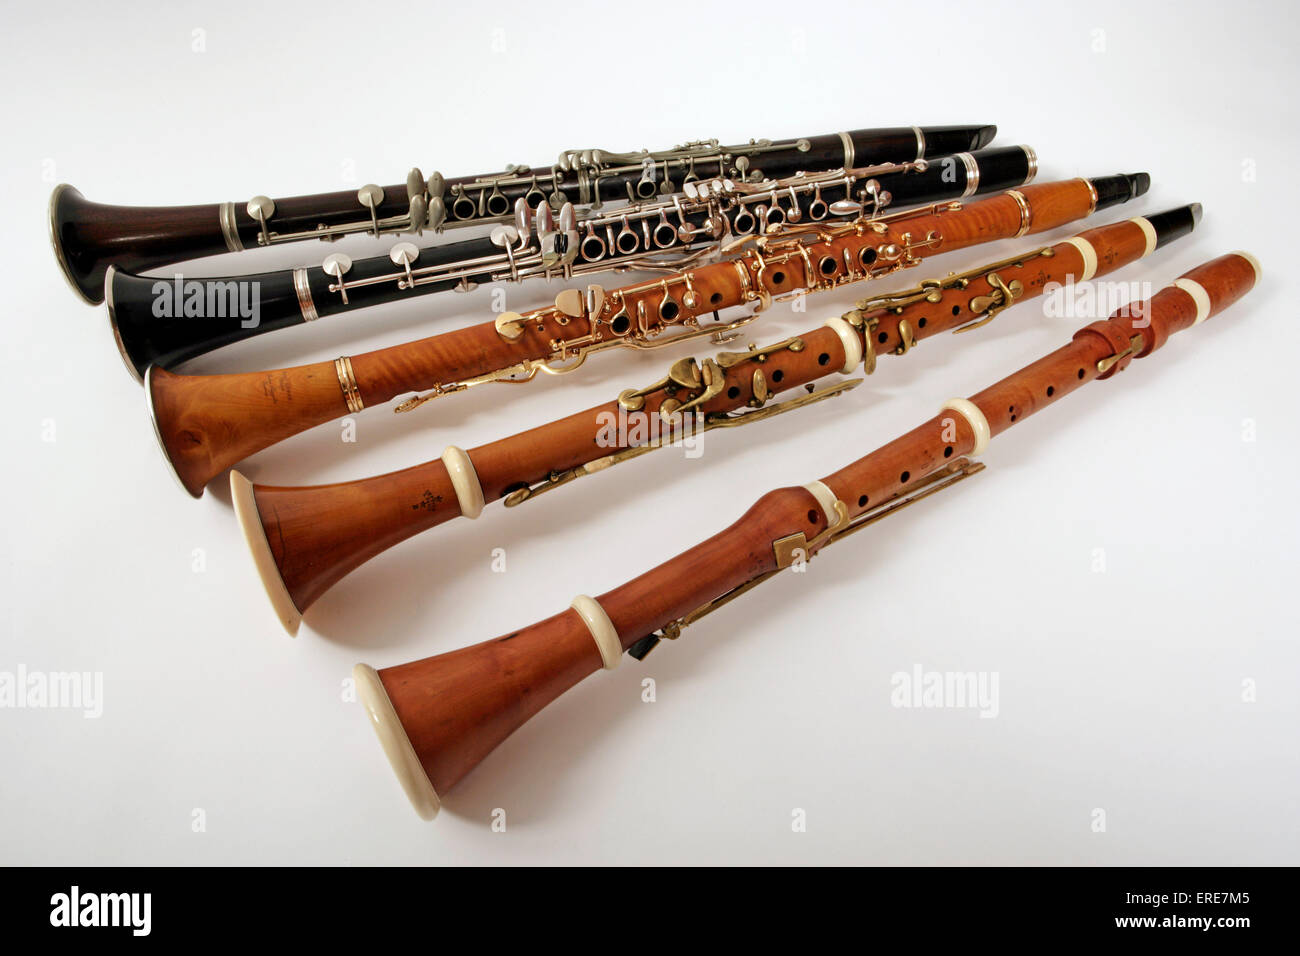 Collection of early music clarinets, from baroque, classical, romantic periods. Stock Photo